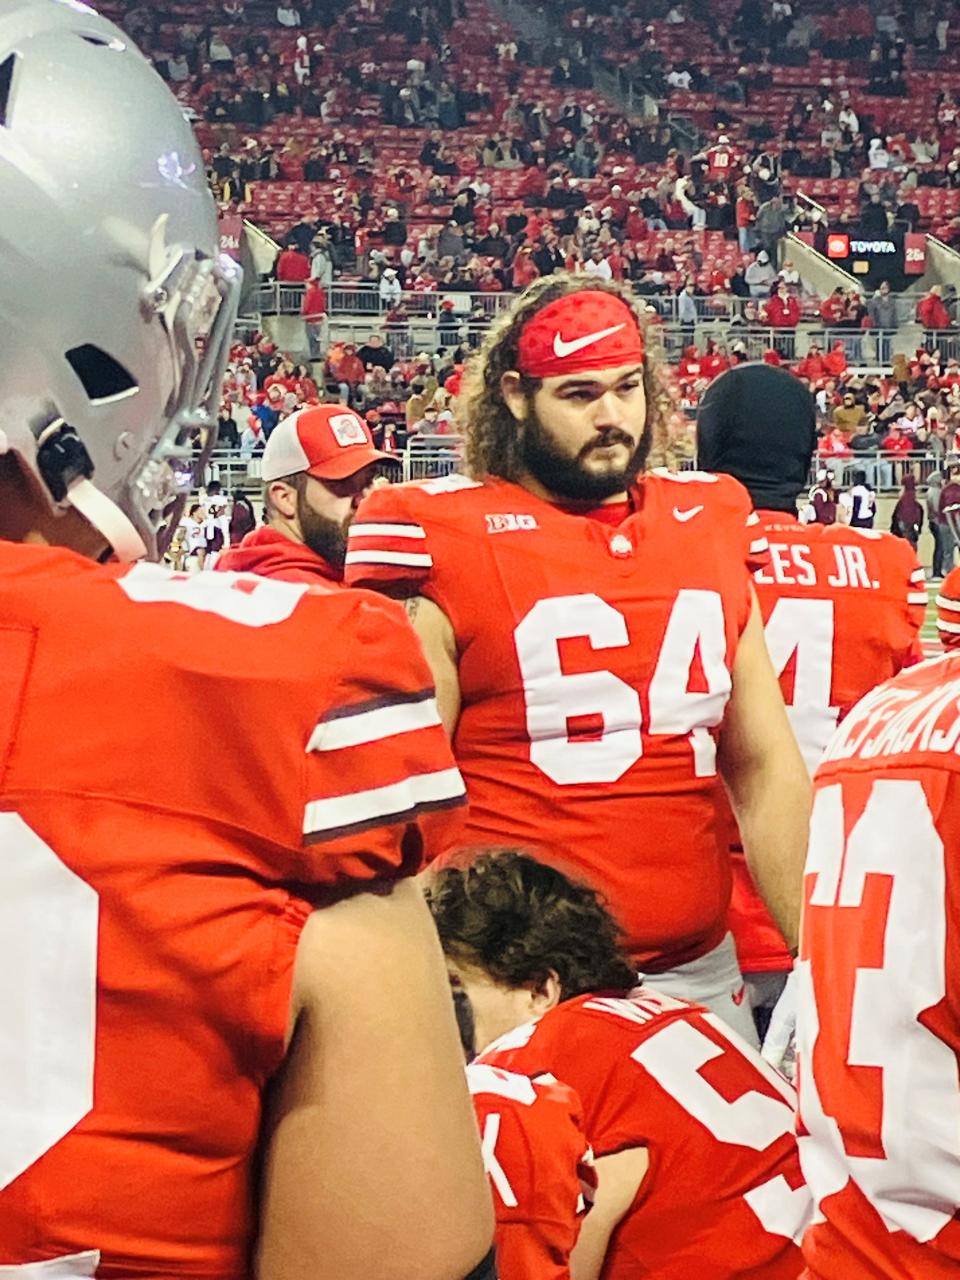 Quinton Burke, a former Lancaster standout, talks with teammates on the sideline during the Buckeyes' 37-3 win over Minnesota on Saturday, Nov. 18 at Ohio Stadium.